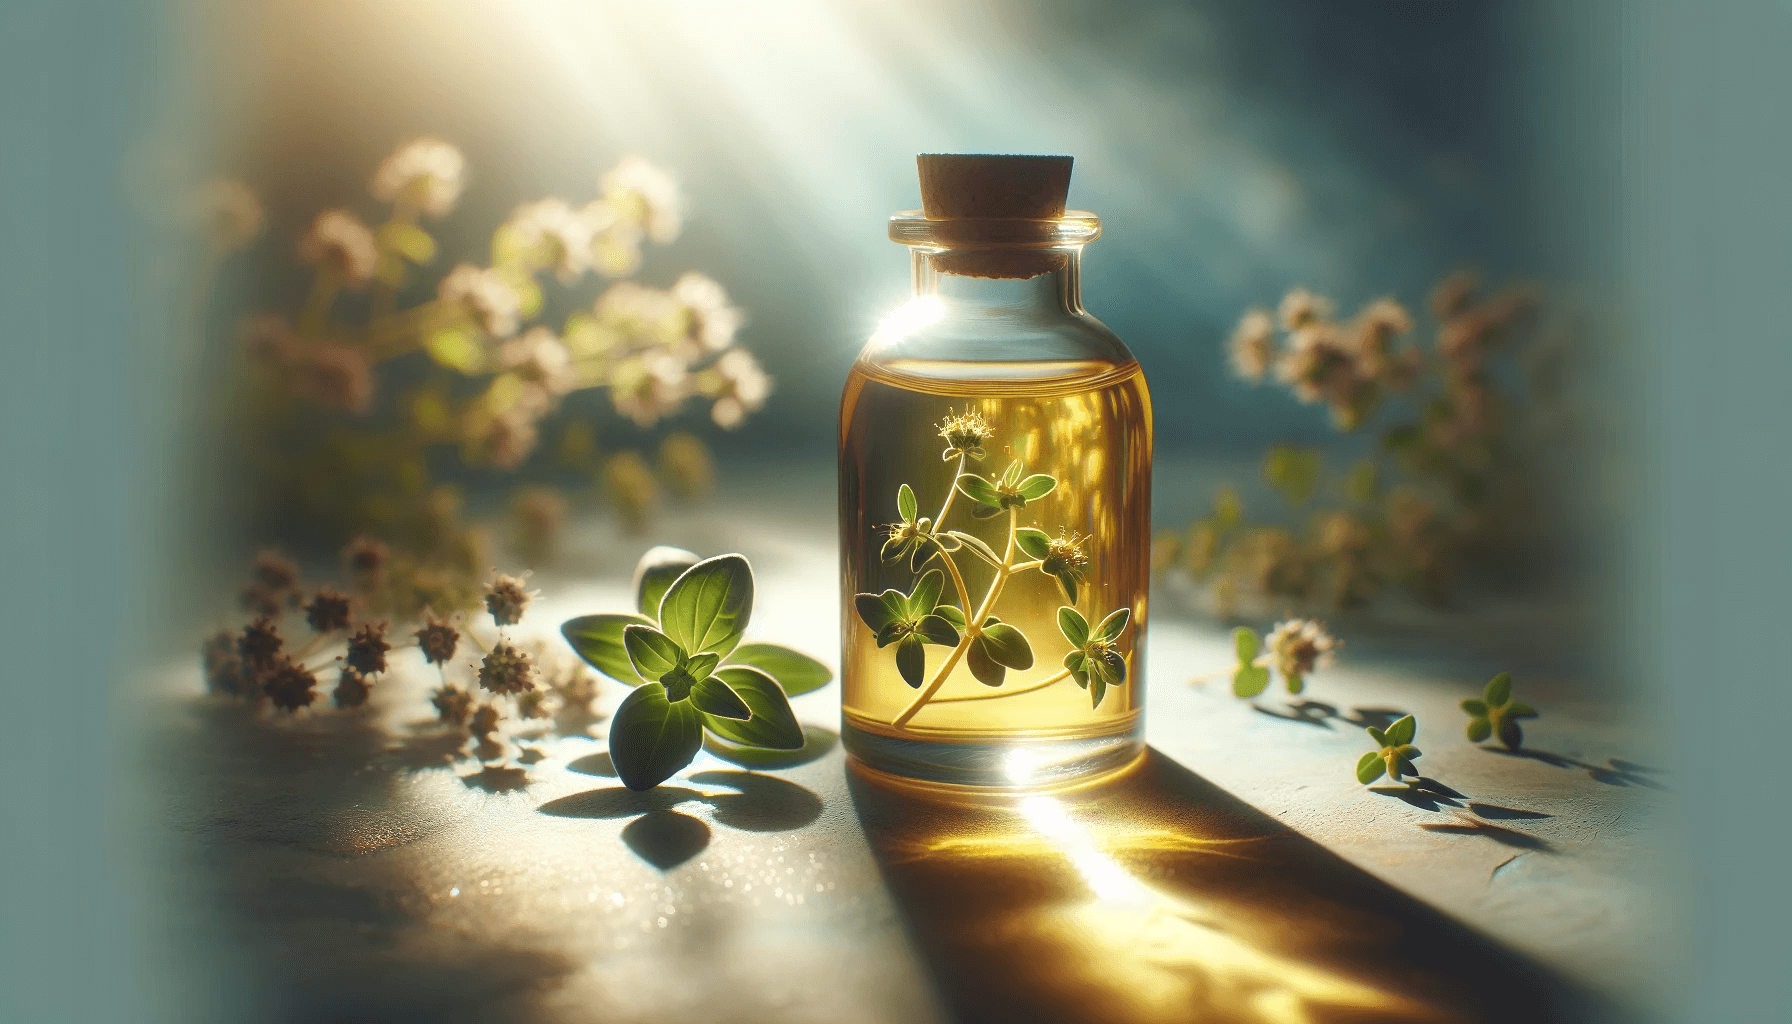 Oregano oil illuminated by the soft glow of natural light.